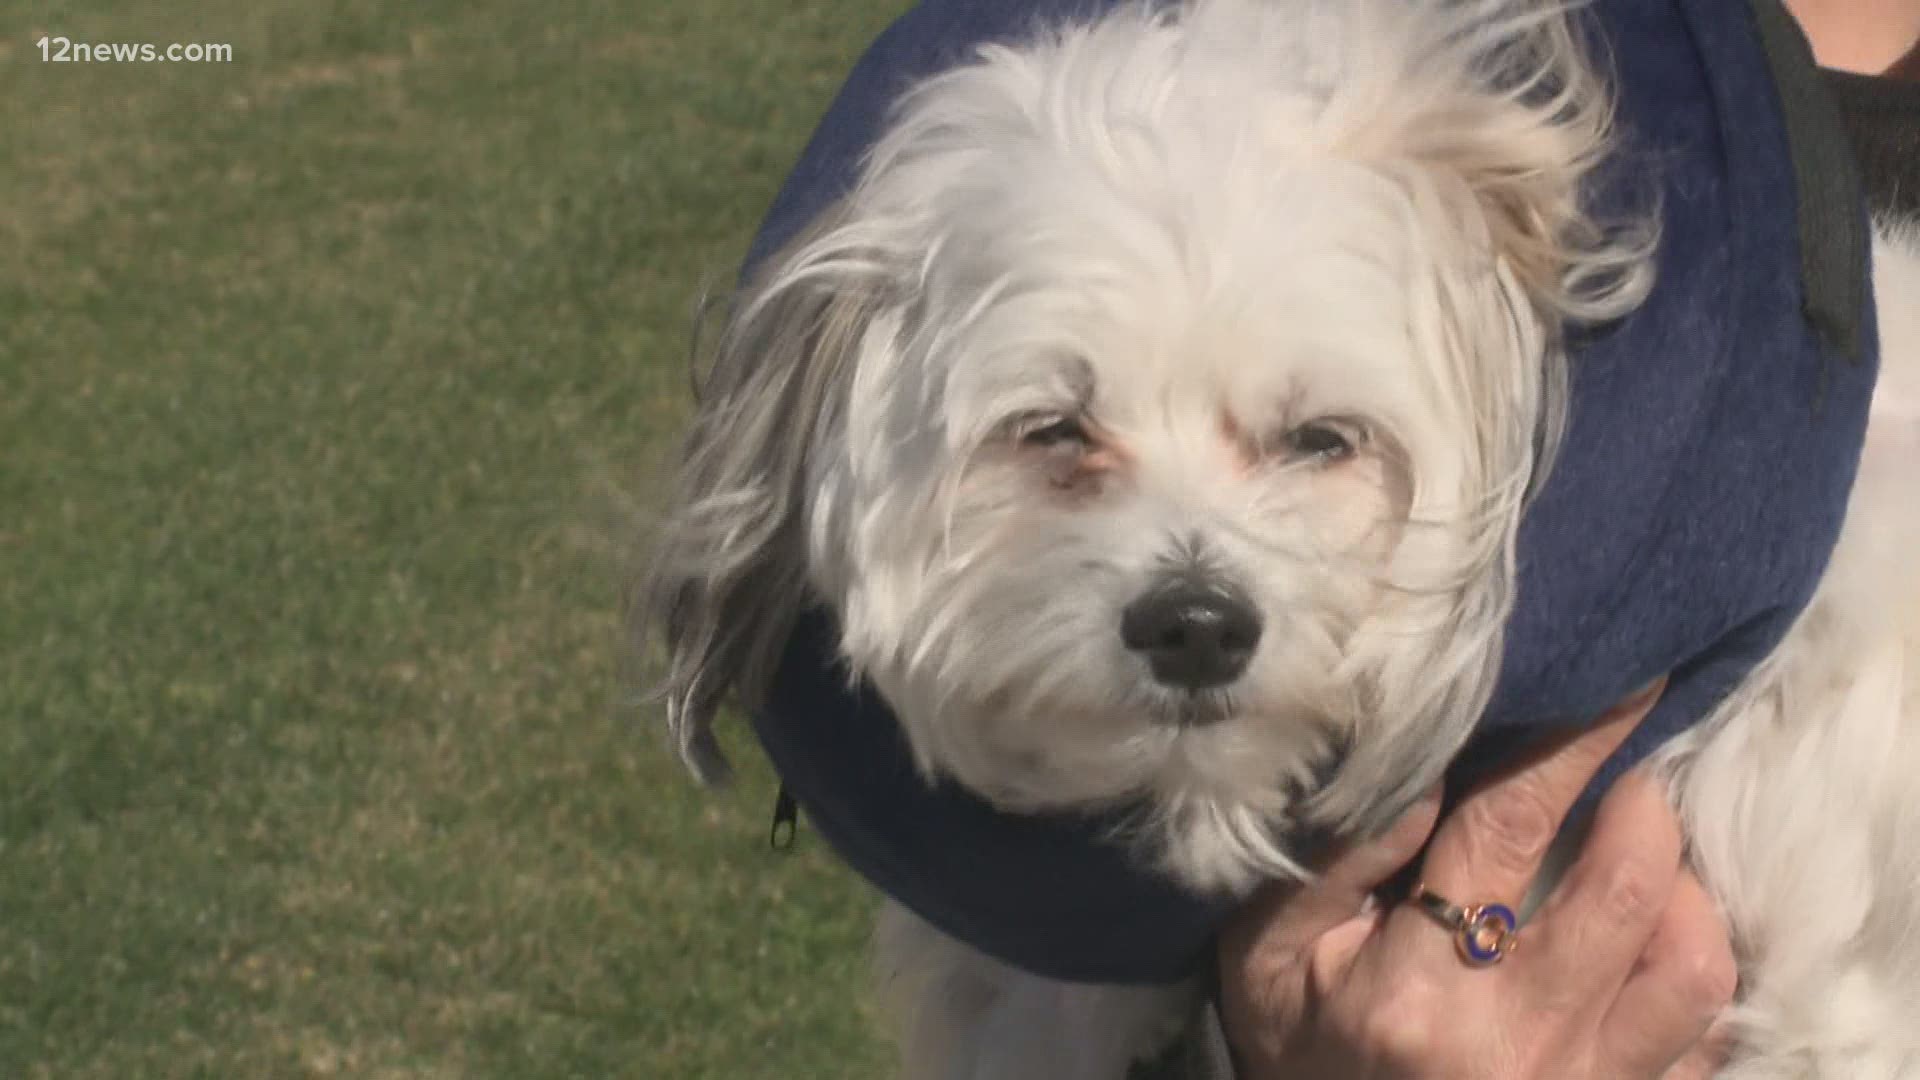 A Scottsdale pet owner is traumatized days after a coyote attacked her small dog. An expert weighs in on how to keep your pets safe.